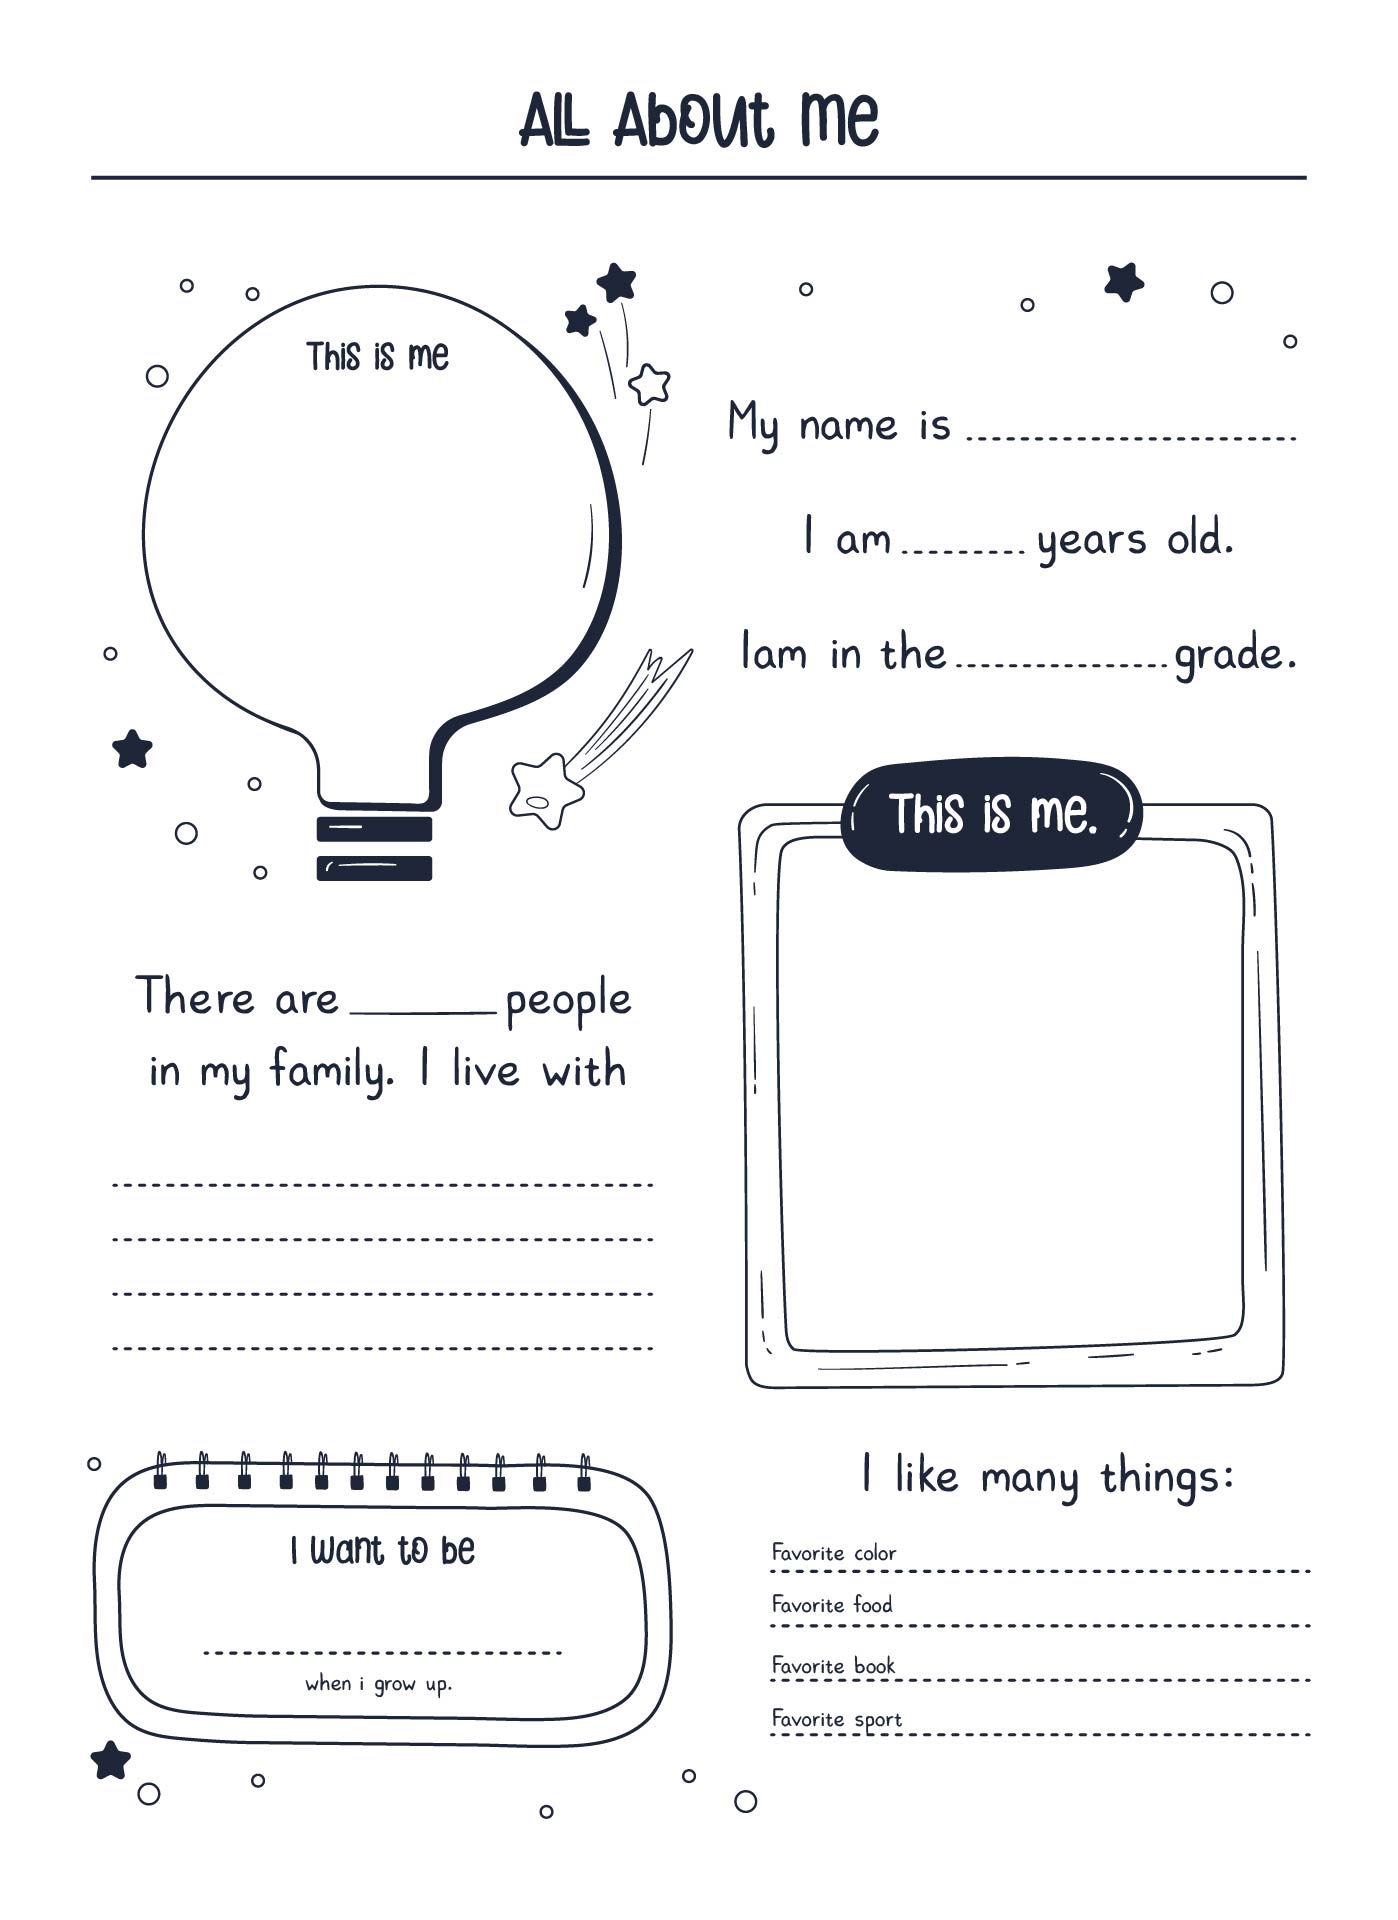 7-best-images-of-me-printable-poster-all-about-me-toddler-all-about